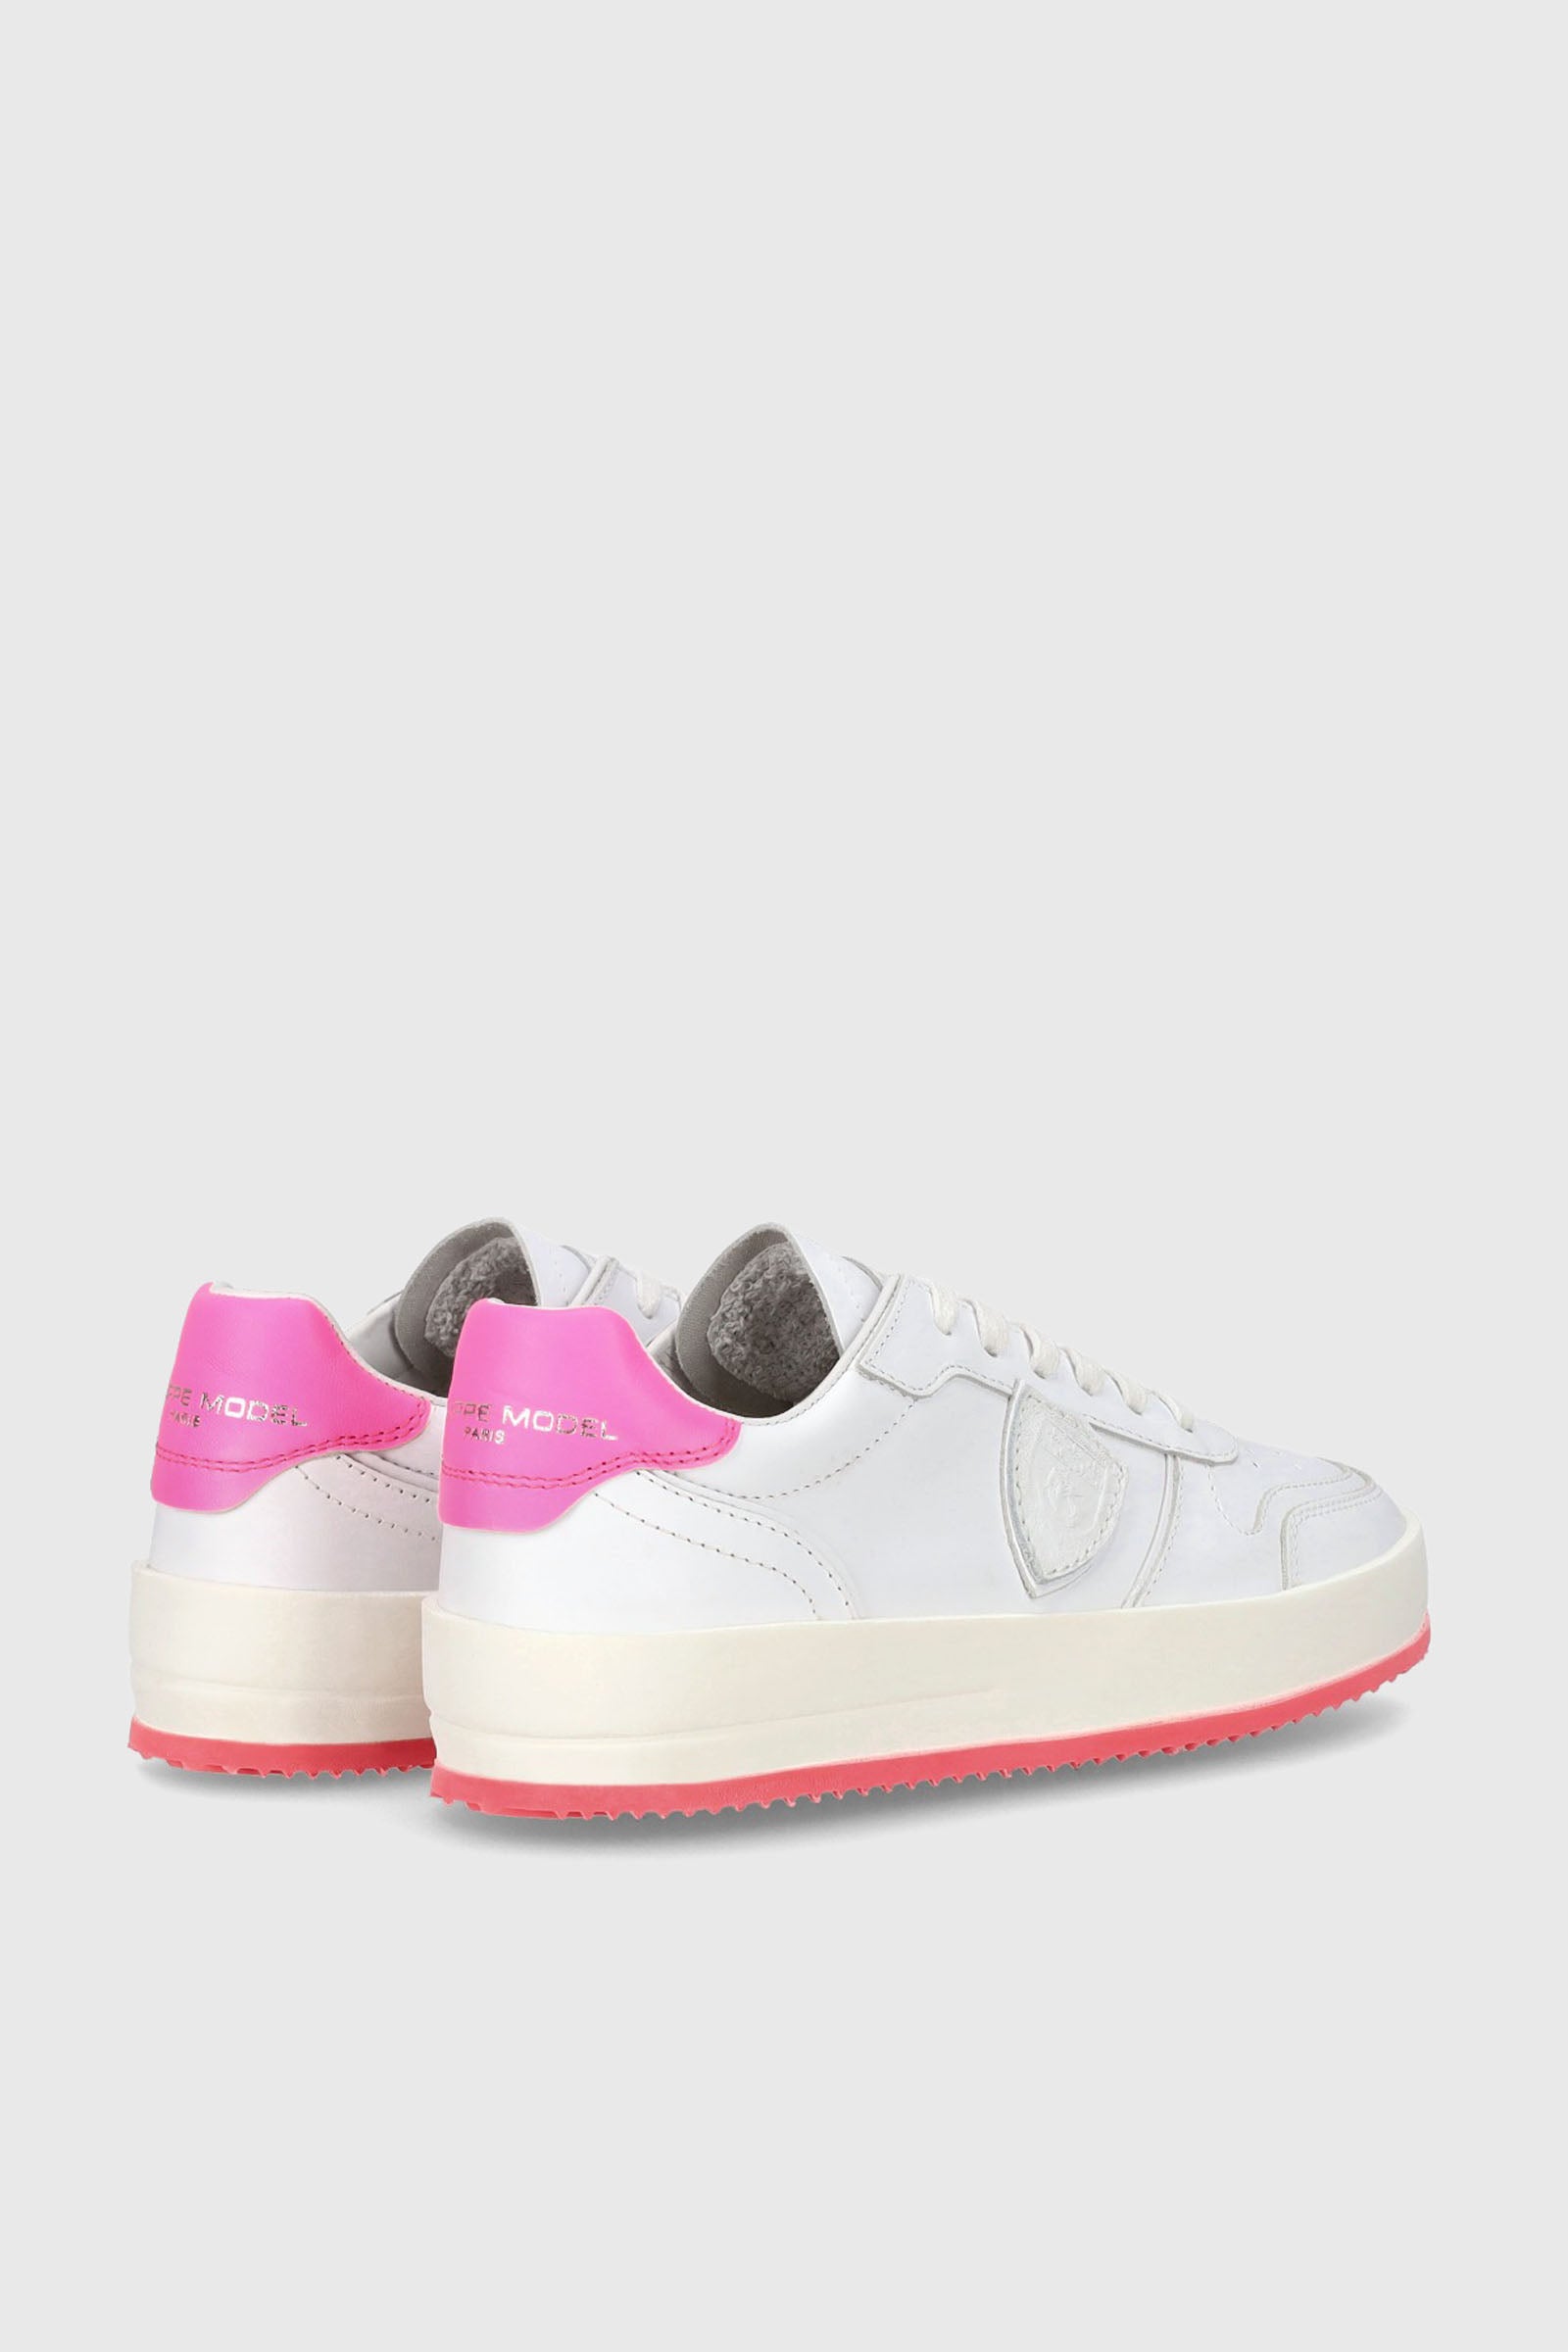 Philippe Model Sneaker Nice Veau Leather White/Fuxia - 3